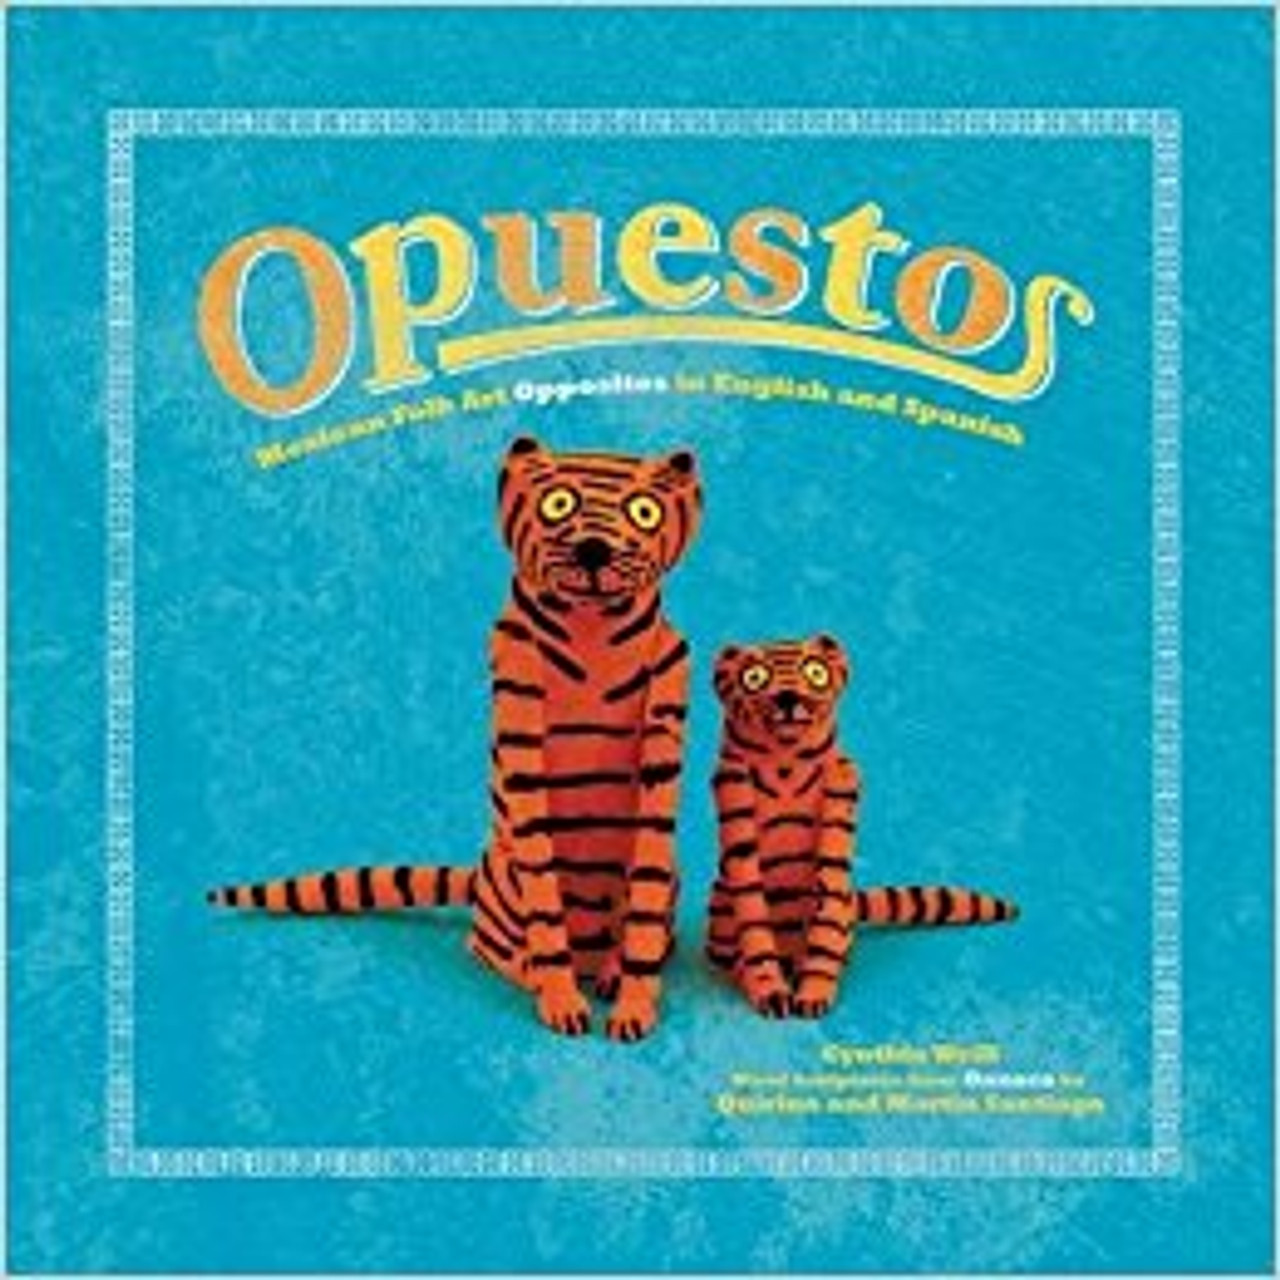 Opuestos: Mexican Folk Art Opposites in English and Spanish by Cynthia Weill 